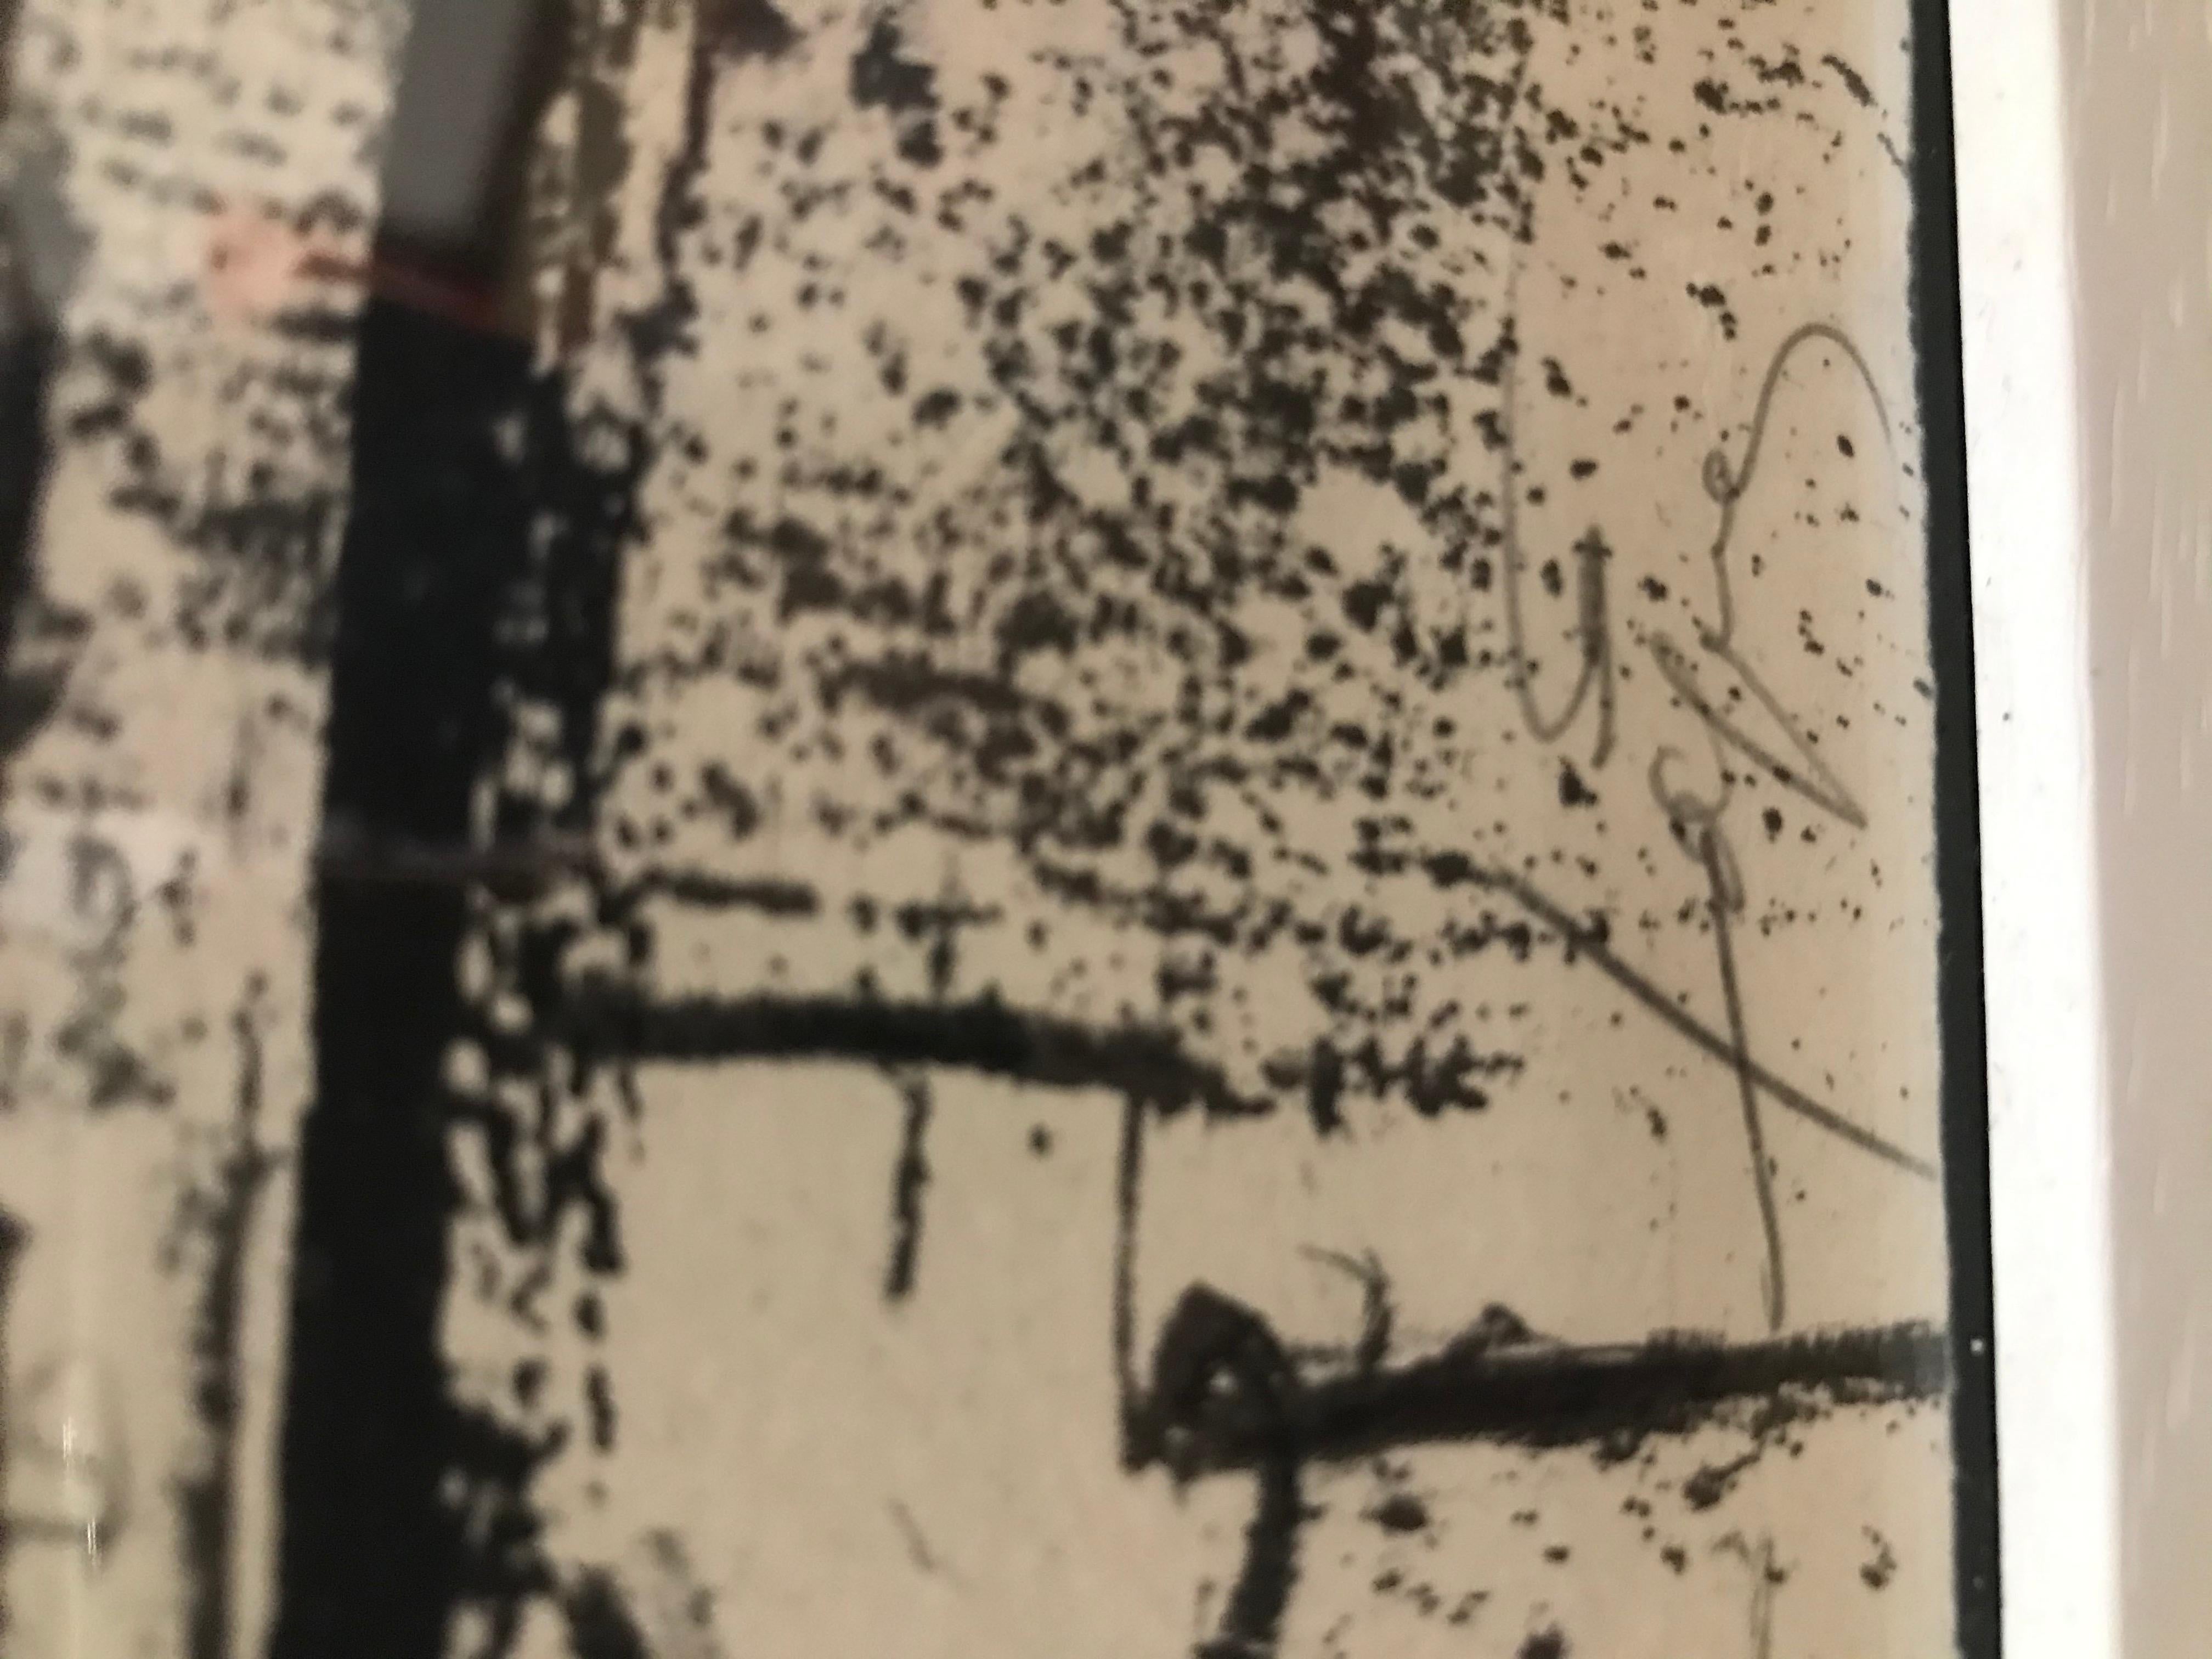 Antoni Tàpies - untitled from Berlin Suite - hand-signed lithograph 1